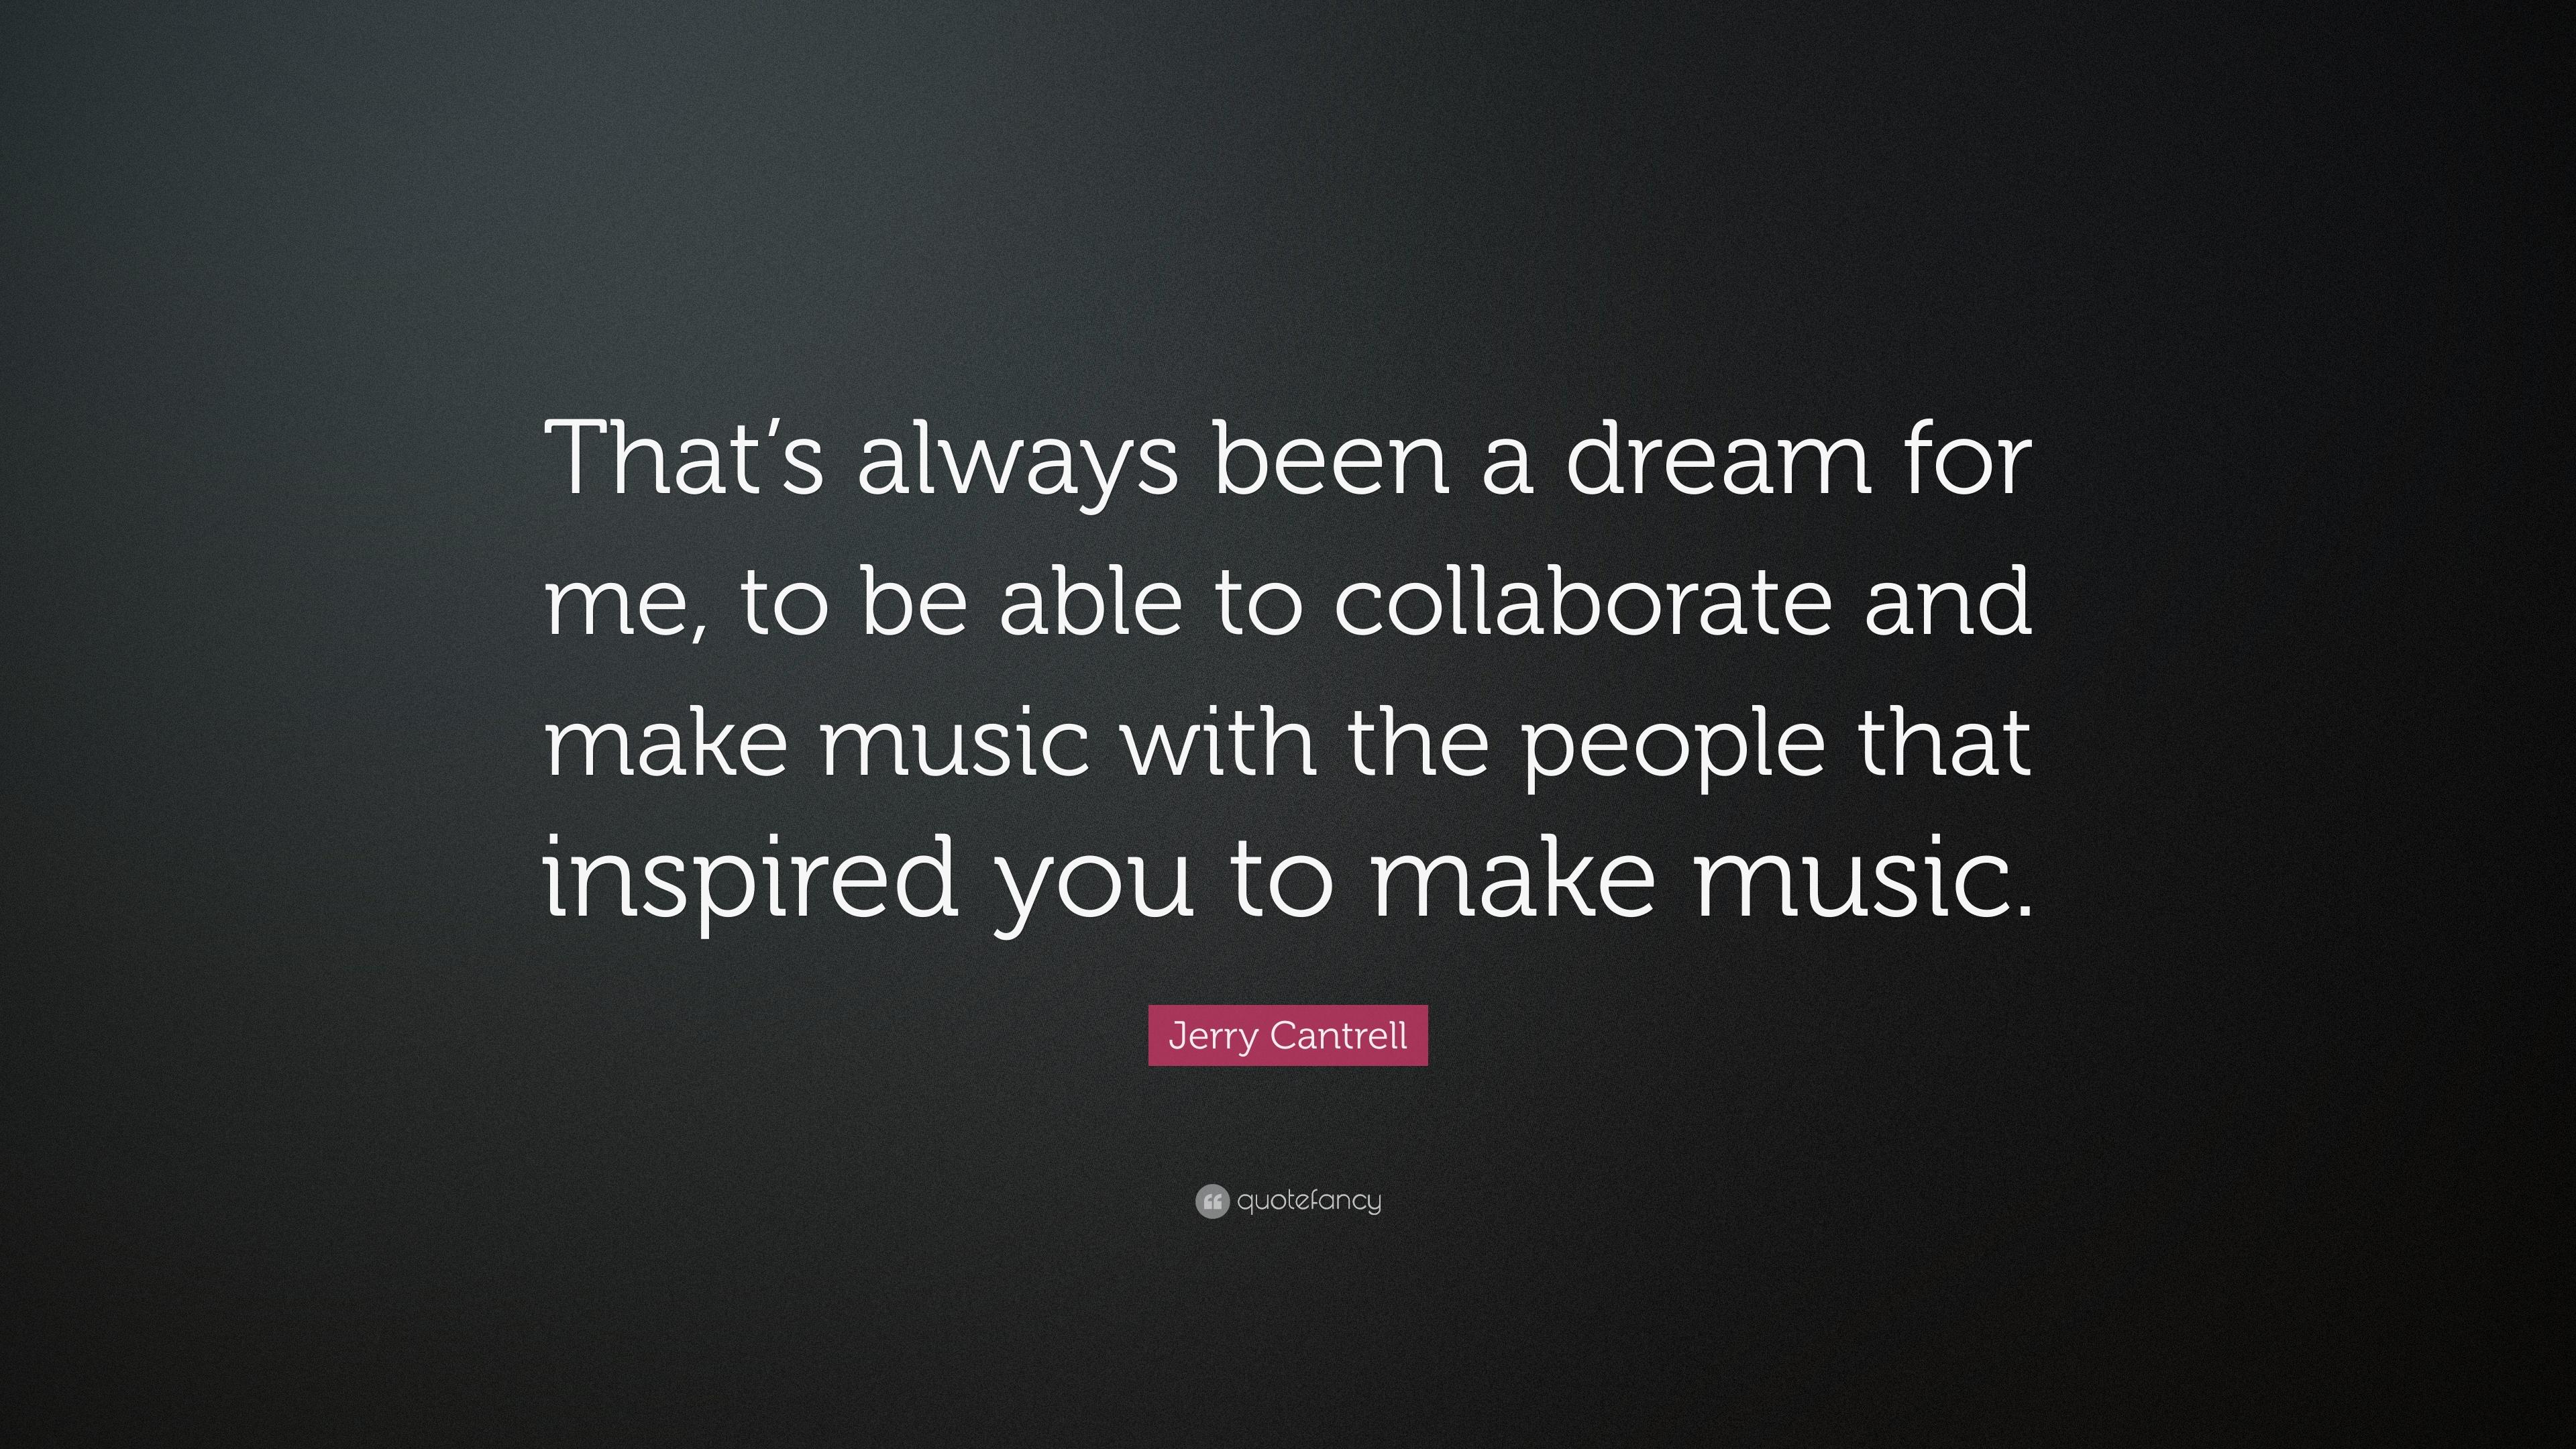 Jerry Cantrell Quote: “That's always been a dream for me, to be able